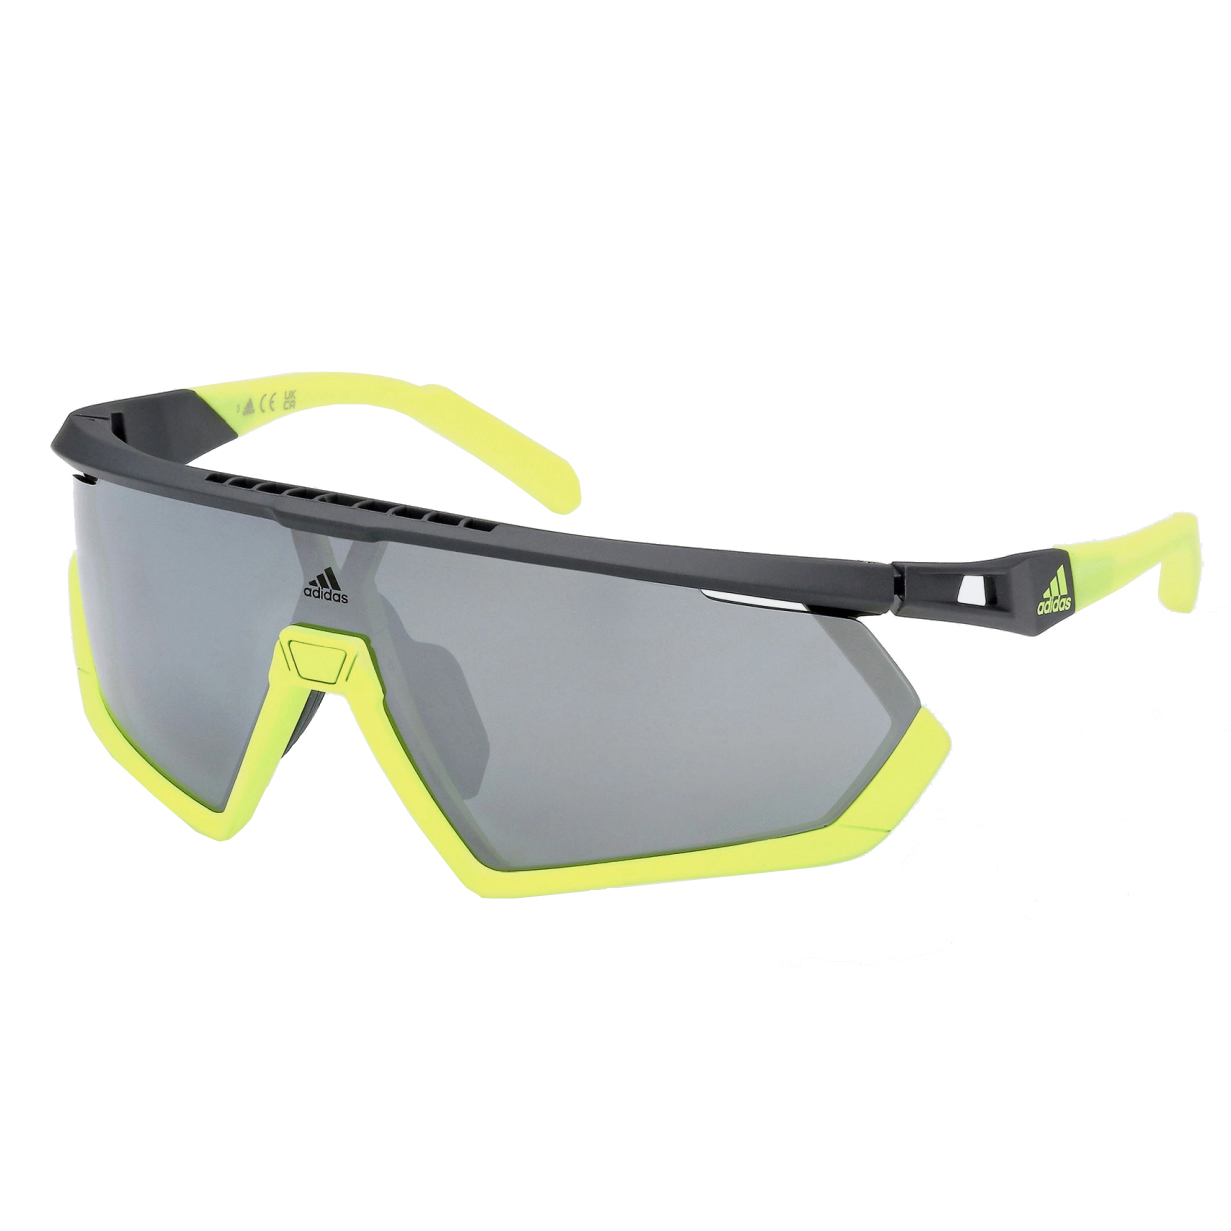 Image of adidas Cmpt Aero SP0054 Sport Sunglasses - Grey/Other / Contrast Mirror Smoke + Clear